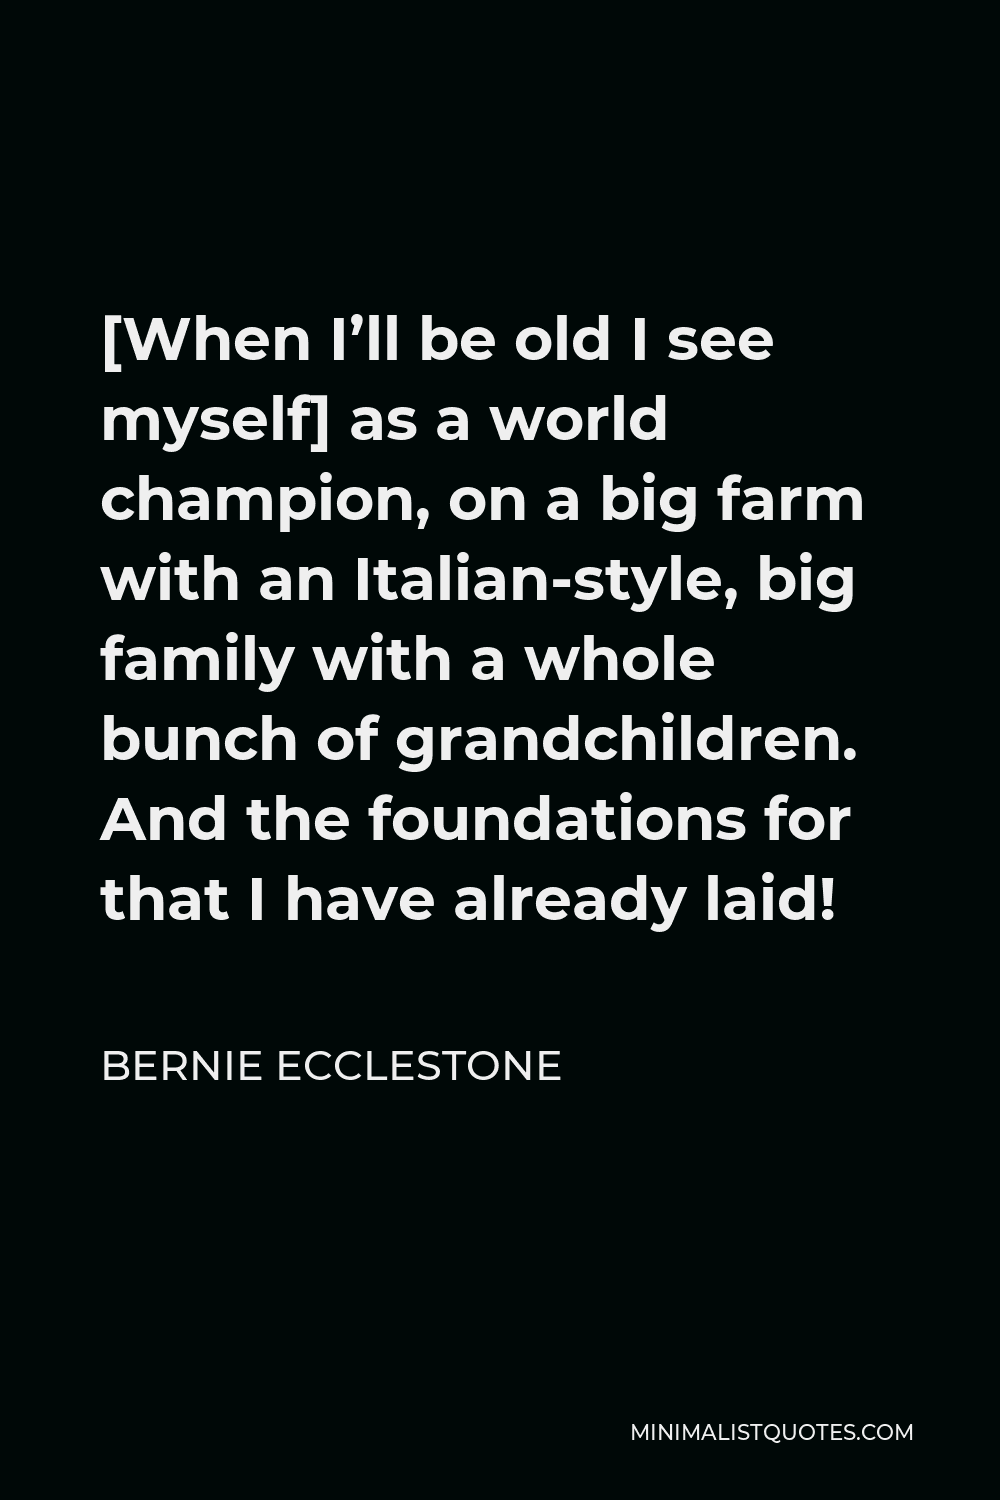 Bernie Ecclestone Quote - [When I’ll be old I see myself] as a world champion, on a big farm with an Italian-style, big family with a whole bunch of grandchildren. And the foundations for that I have already laid!